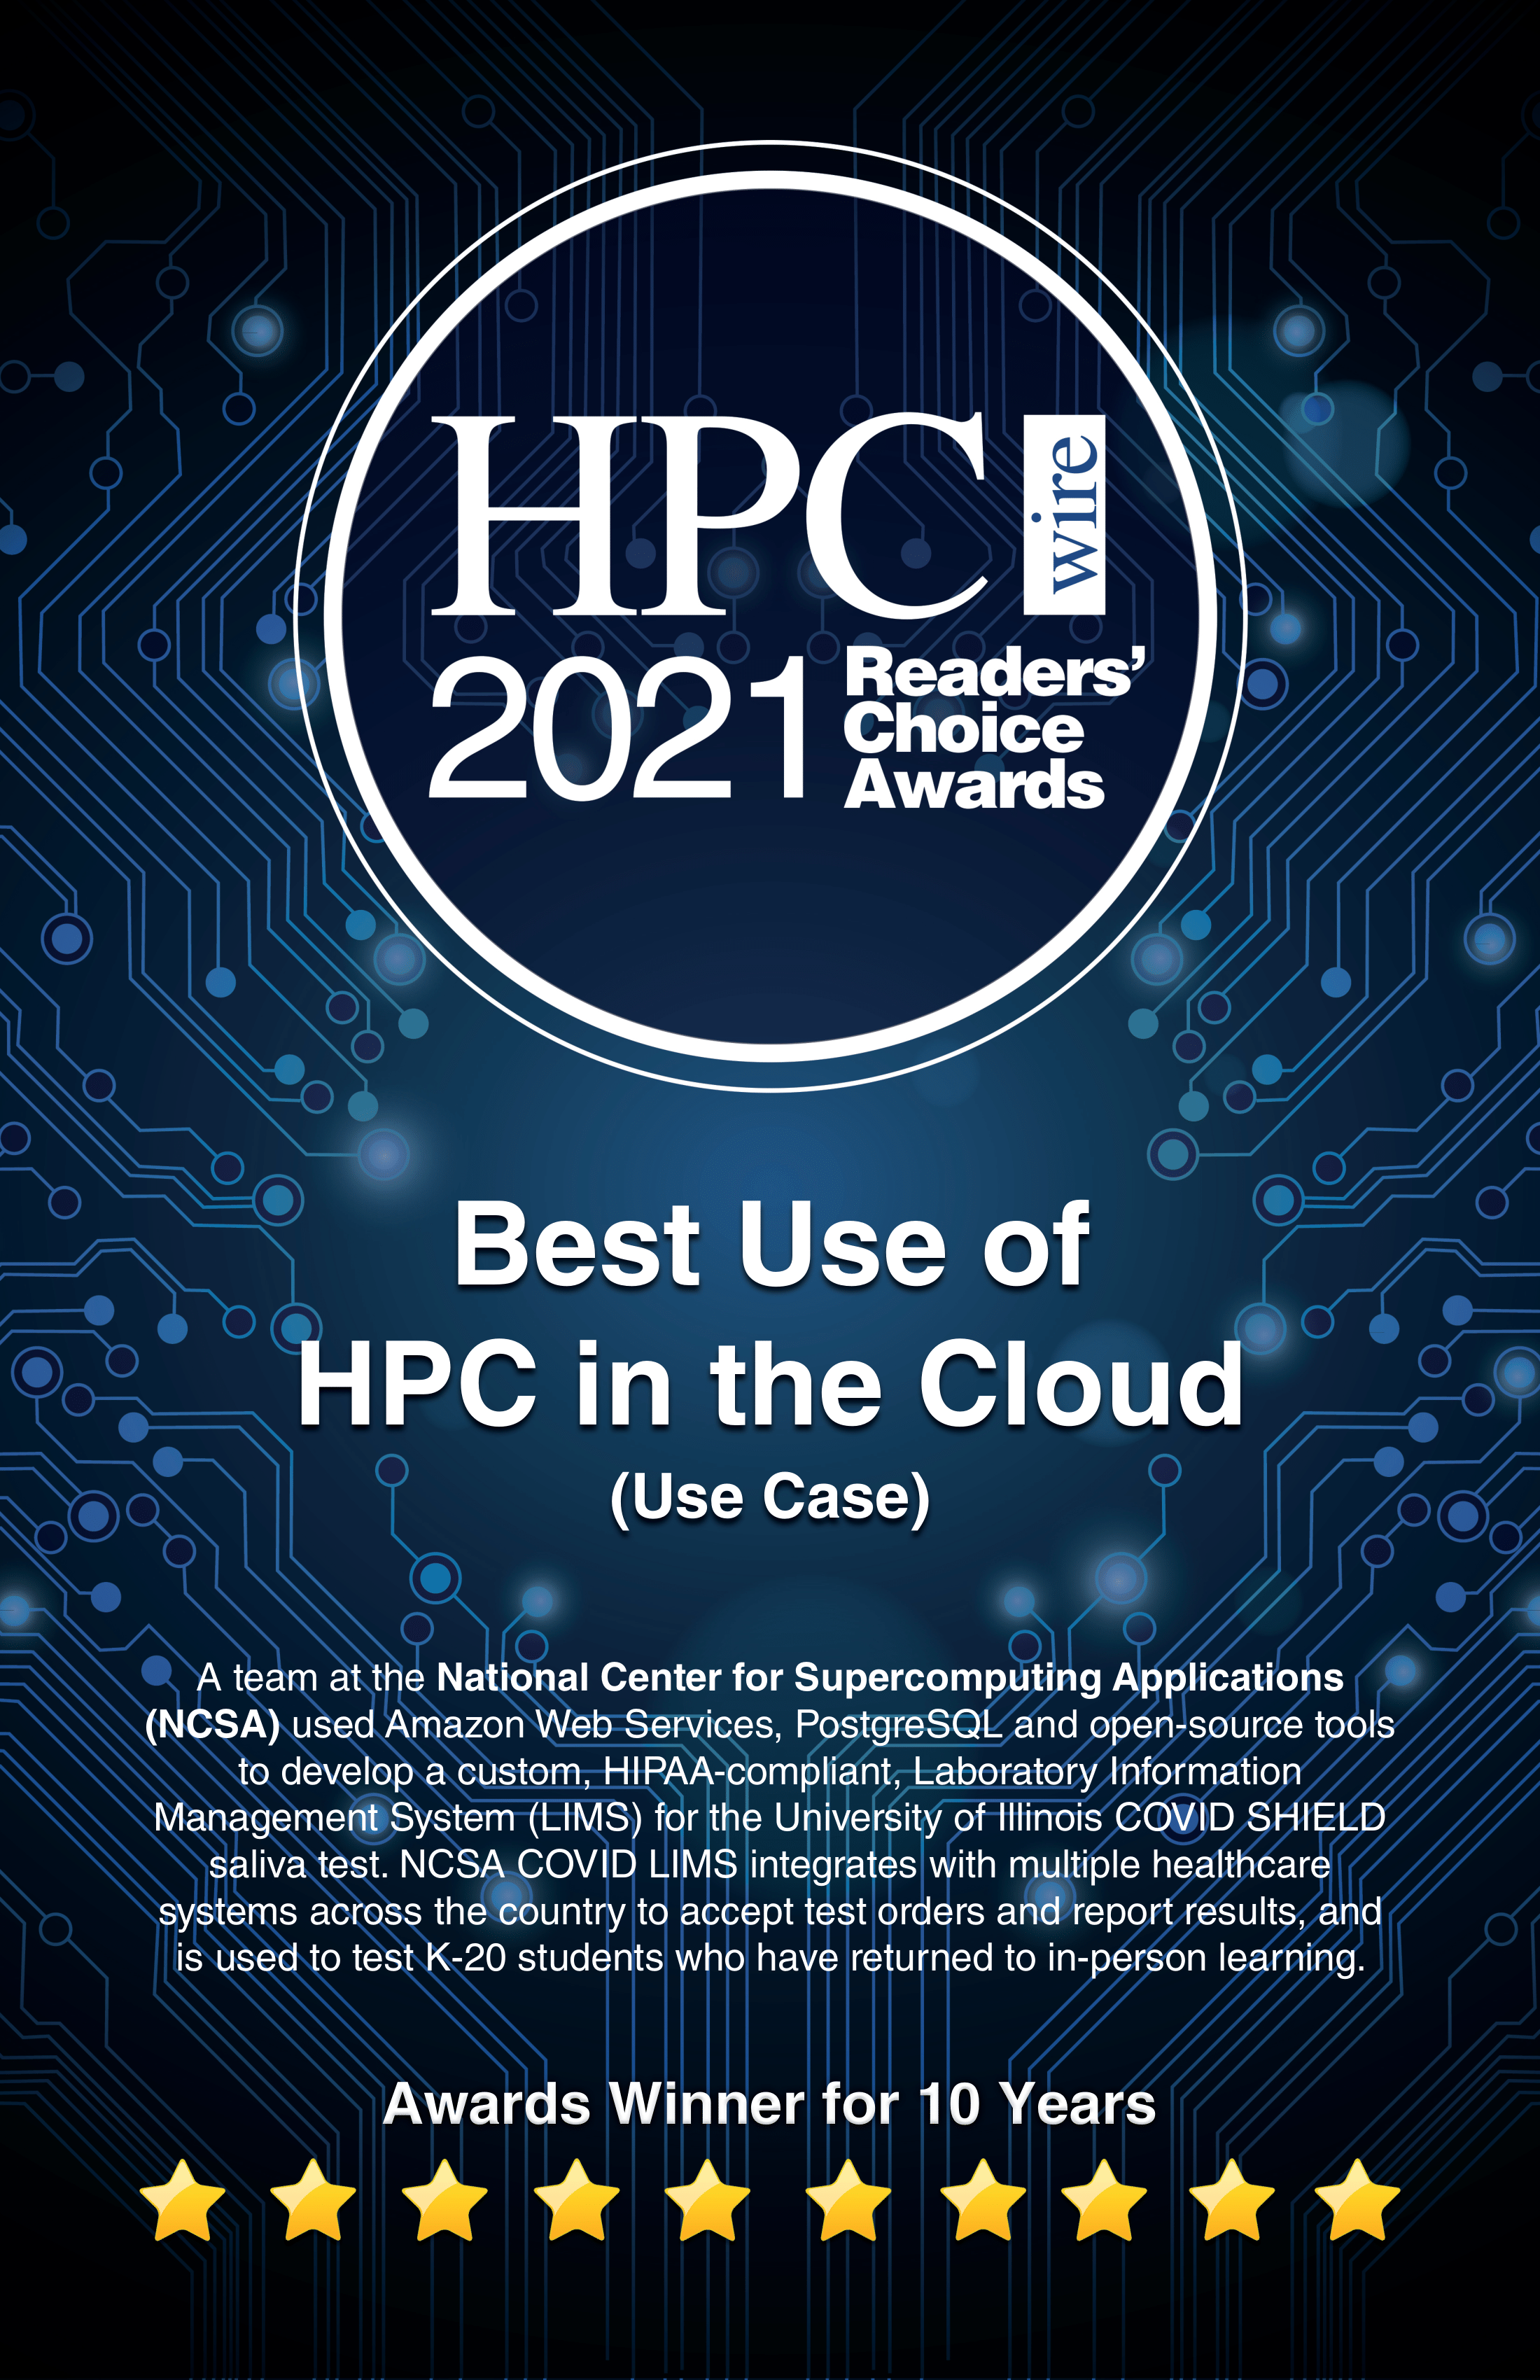 2021 HPCwire Best Use of HPC in the Cloud Award